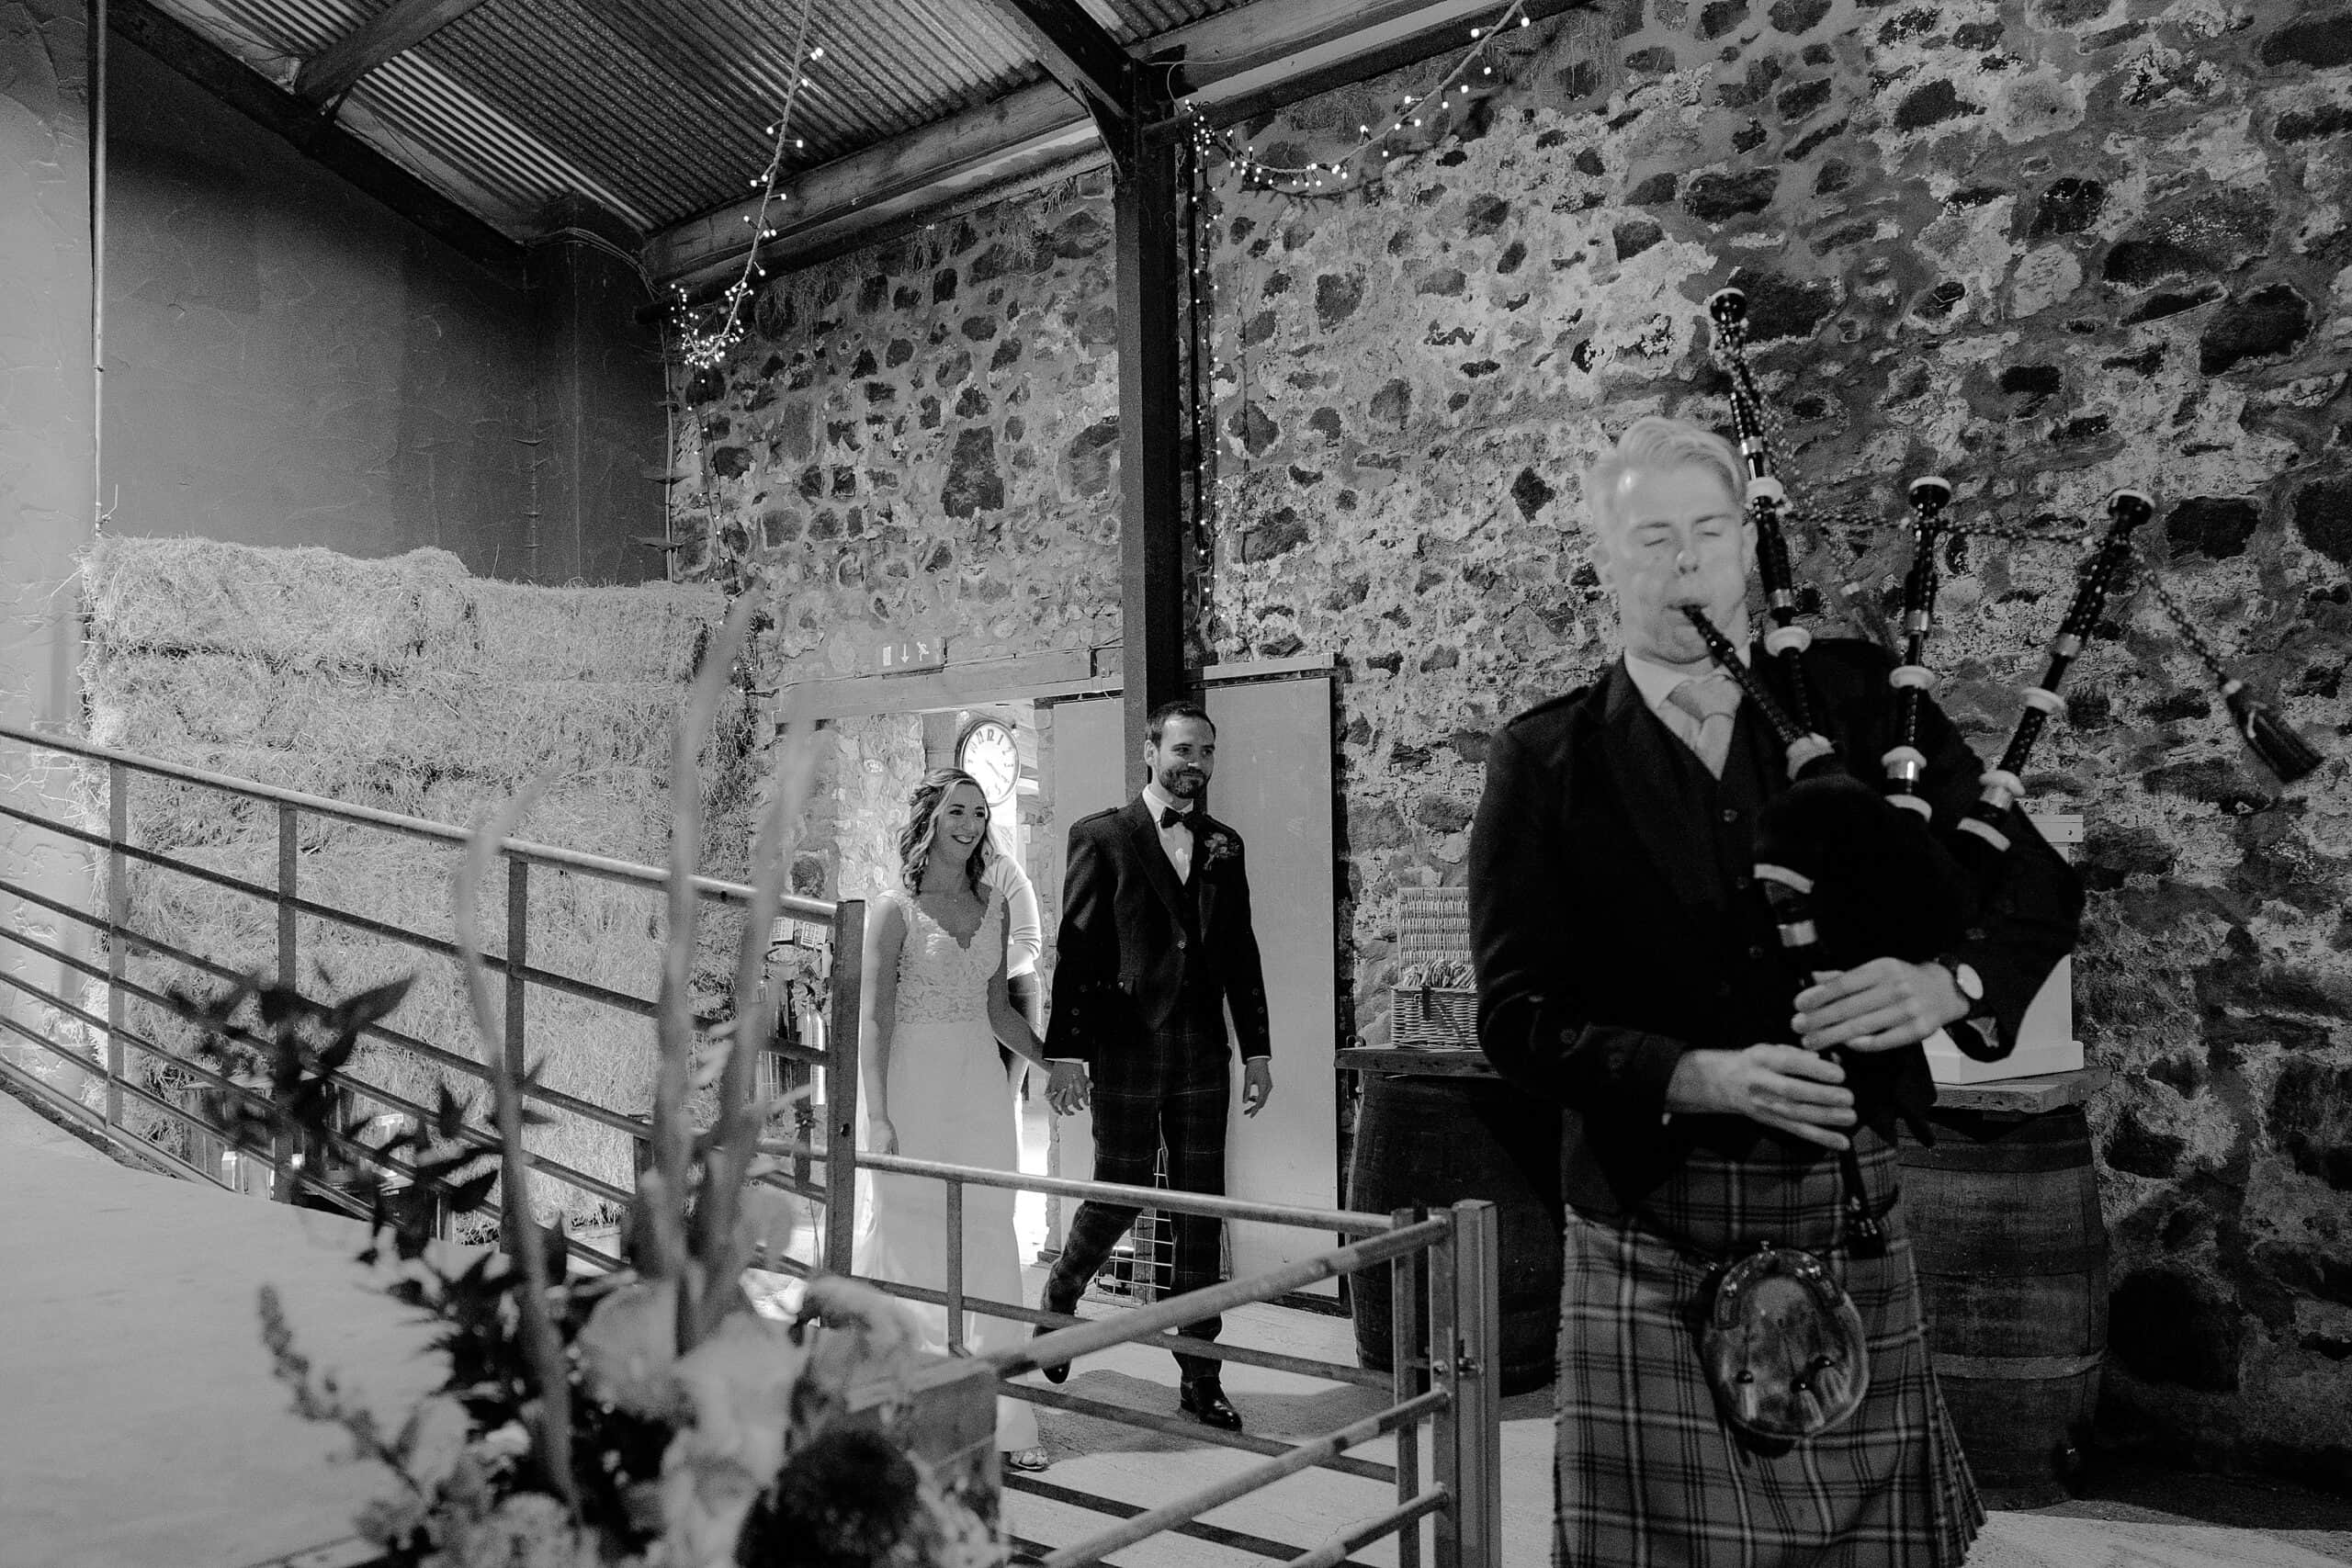 interior inside view of the hay barn at harelaw farm wedding barn venue fenwick scotland showing the bride and groom following piper into evening reception